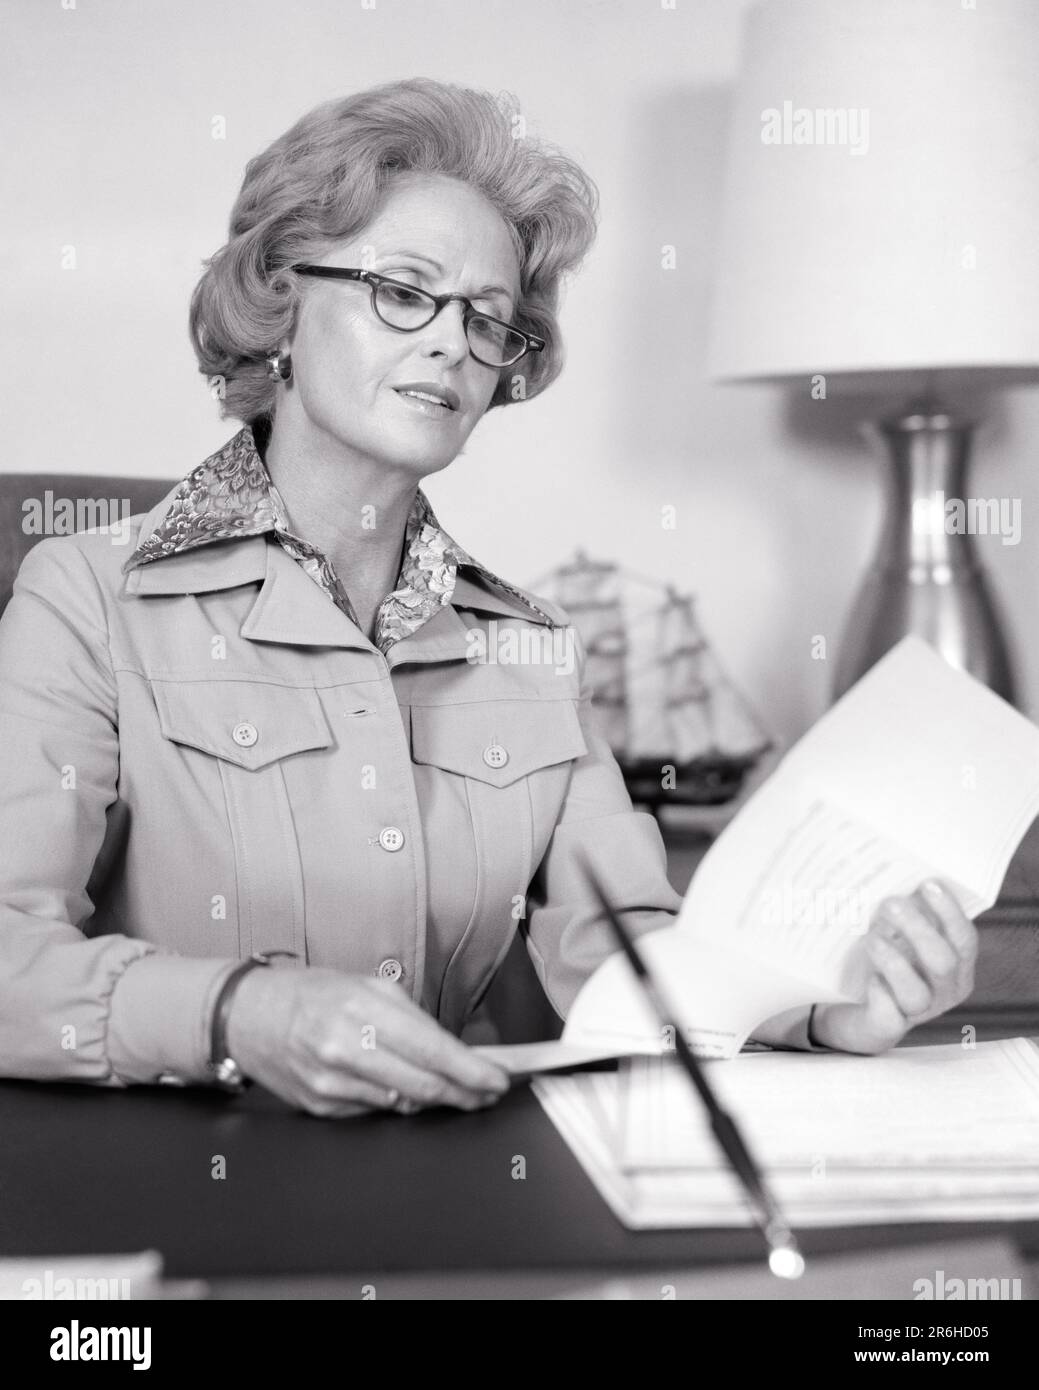 1970s MATURE WOMAN IN OFFICE SITTING AT DESK READING A DOCUMENT WEARING A BUSINESS SUIT AND HALF RIM READING GLASSES - o4076 HAR001 HARS SATISFACTION FEMALES JOBS MANAGER COPY SPACE HALF-LENGTH LADIES PERSONS PROFESSION CONFIDENCE EXECUTIVES MIDDLE-AGED B&W SUCCESS SKILL OCCUPATION SKILLS MIDDLE-AGED WOMAN DOCUMENT AND CAREERS KNOWLEDGE LEADERSHIP HALF AUTHORITY OCCUPATIONS BOSSES STYLISH ATTORNEY MANAGERS RIM BLACK AND WHITE CAUCASIAN ETHNICITY HAR001 OLD FASHIONED Stock Photo